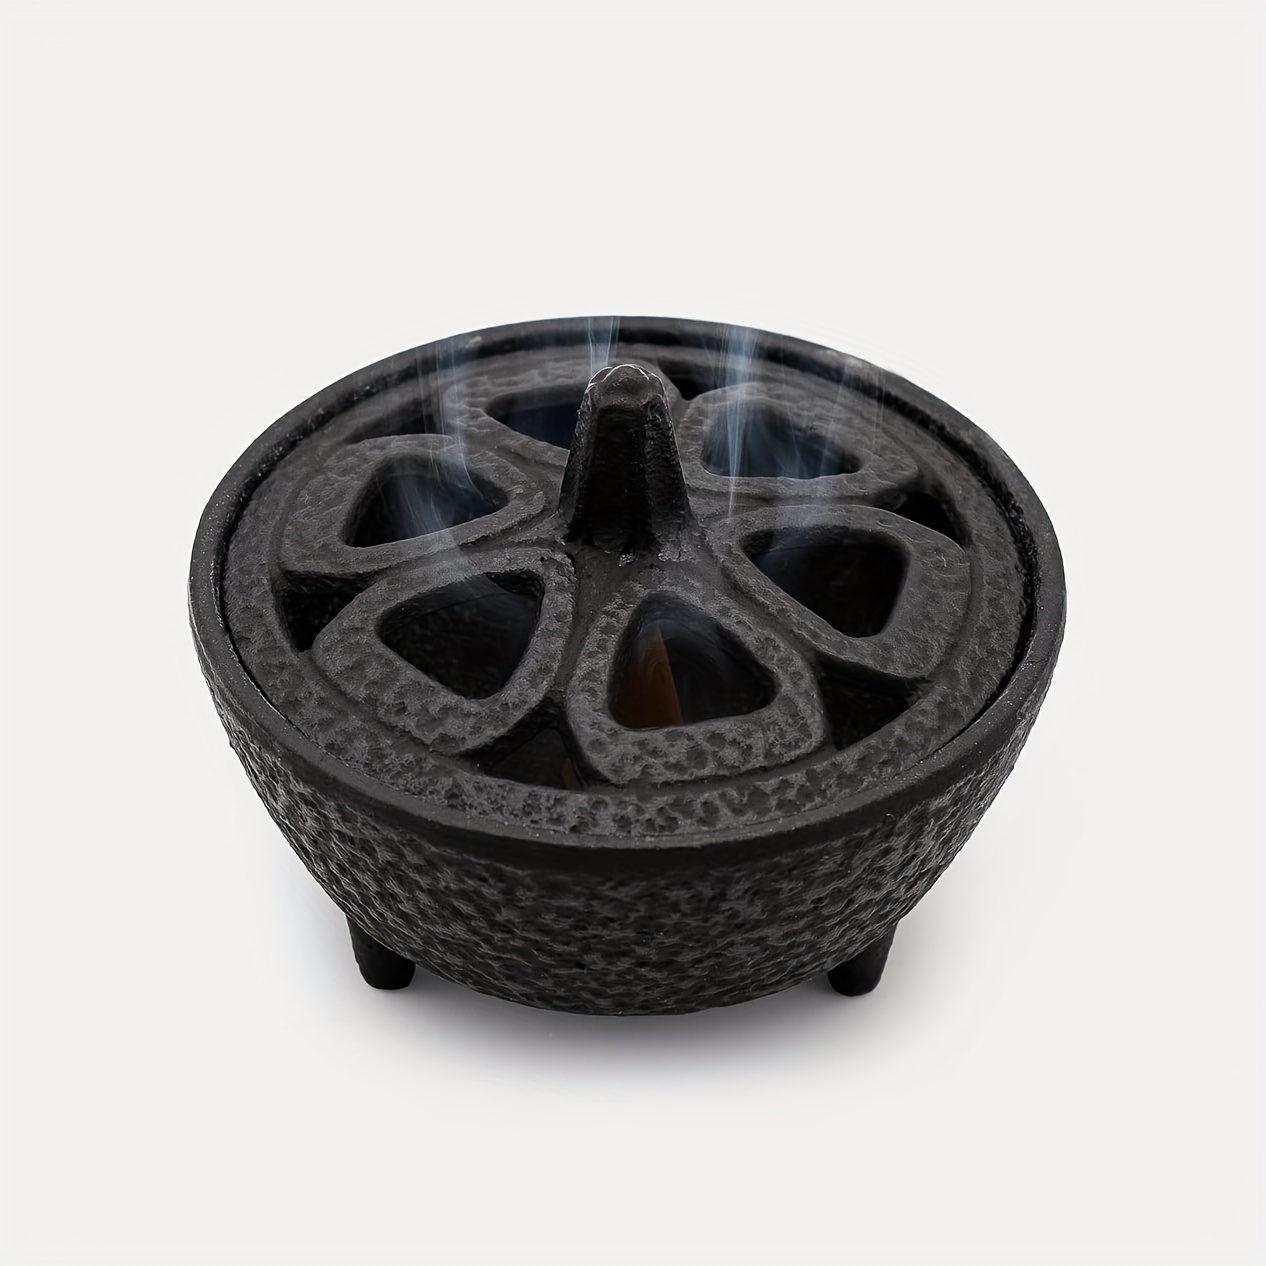 

1pc Cast Iron Incense Burner And Brass Incense Insert Holder For Anointing, Incense, Ritual Use, Decoration Incense Holder, Menorahs, And More (3.1" Diameter)